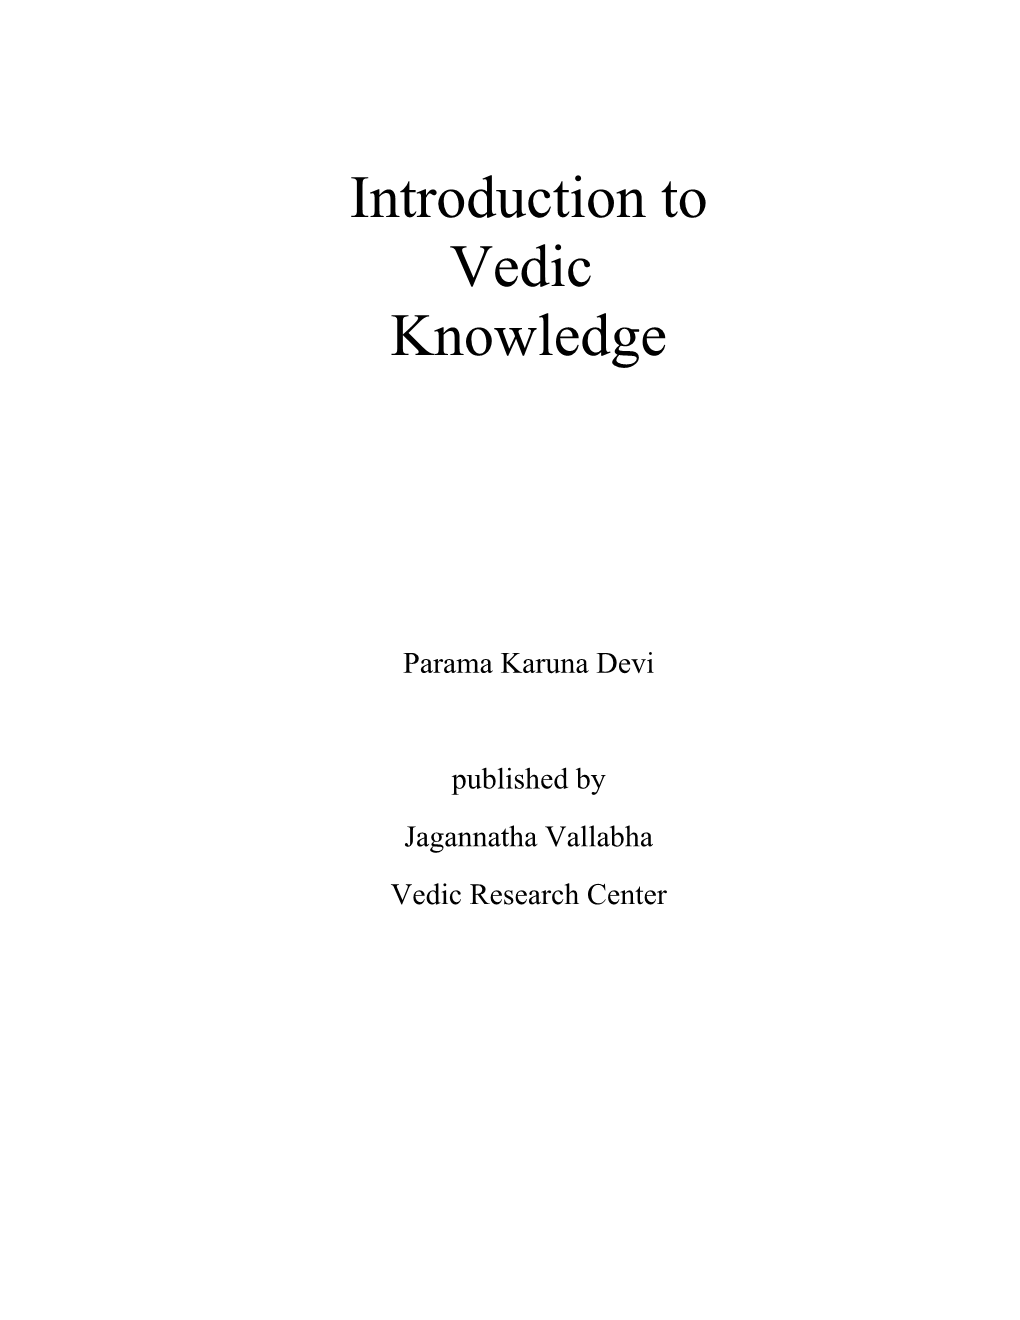 Introduction to Vedic Knowledge